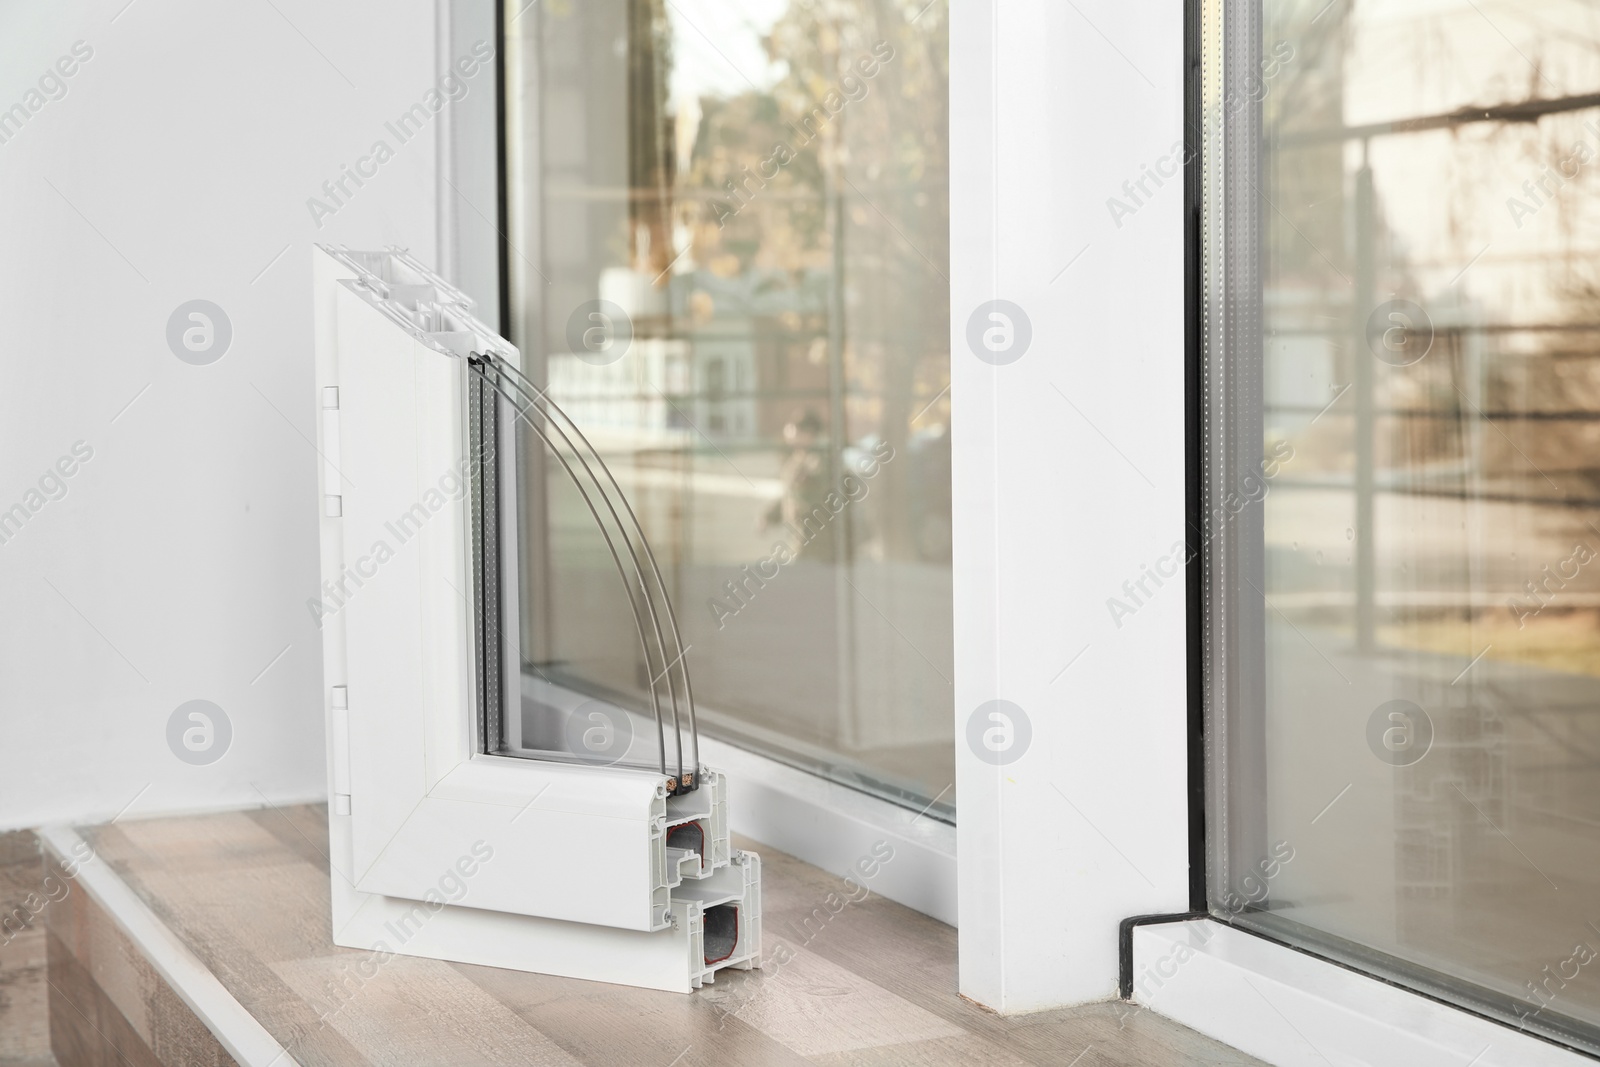 Photo of Sample of modern window profile on sill indoors, space for text. Installation service